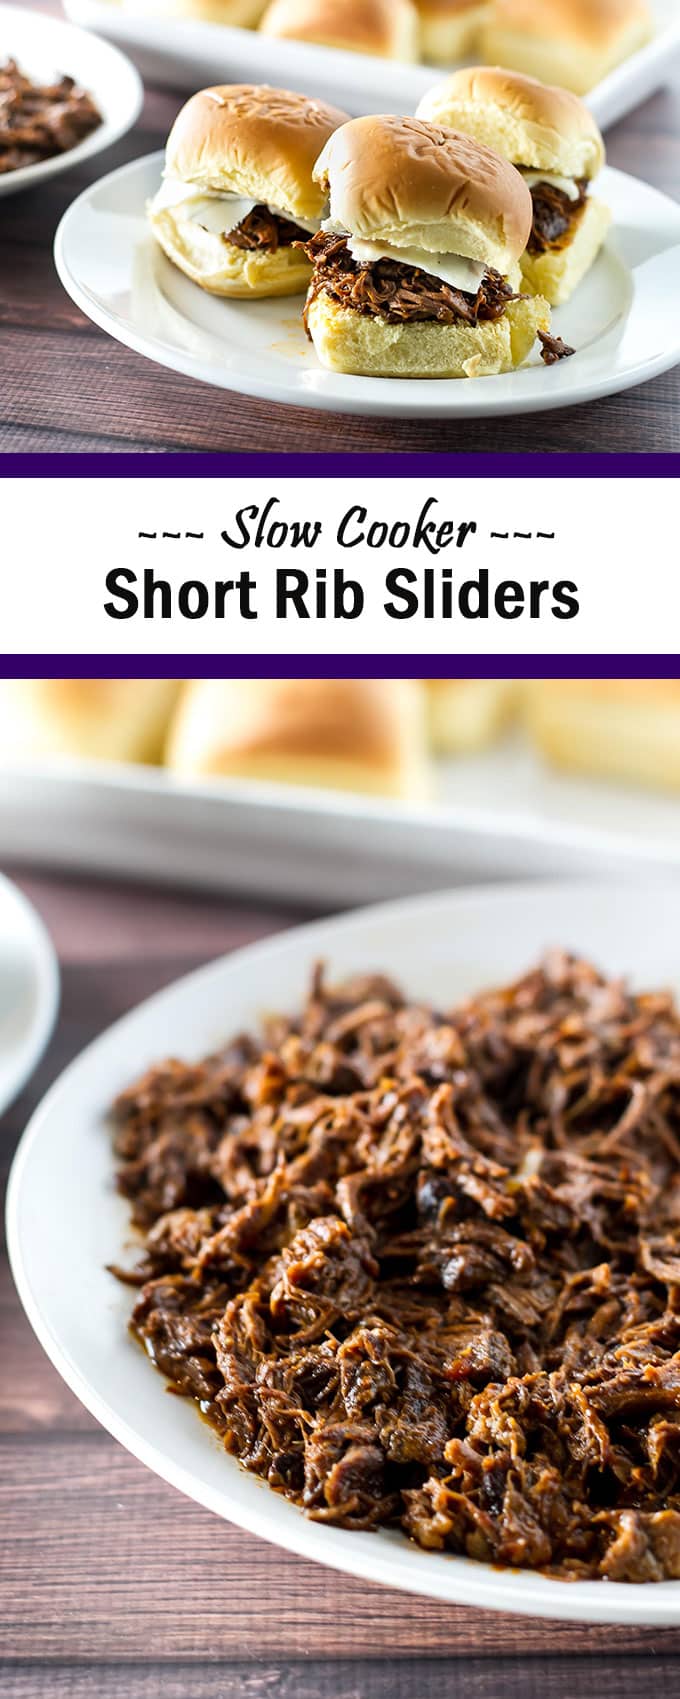 Beef short ribs simmered in a savory sauce all day then piled high on sweet Hawaiian rolls. These slow cooker short rib sliders are a game-day favorite! | girlgonegourmet.com